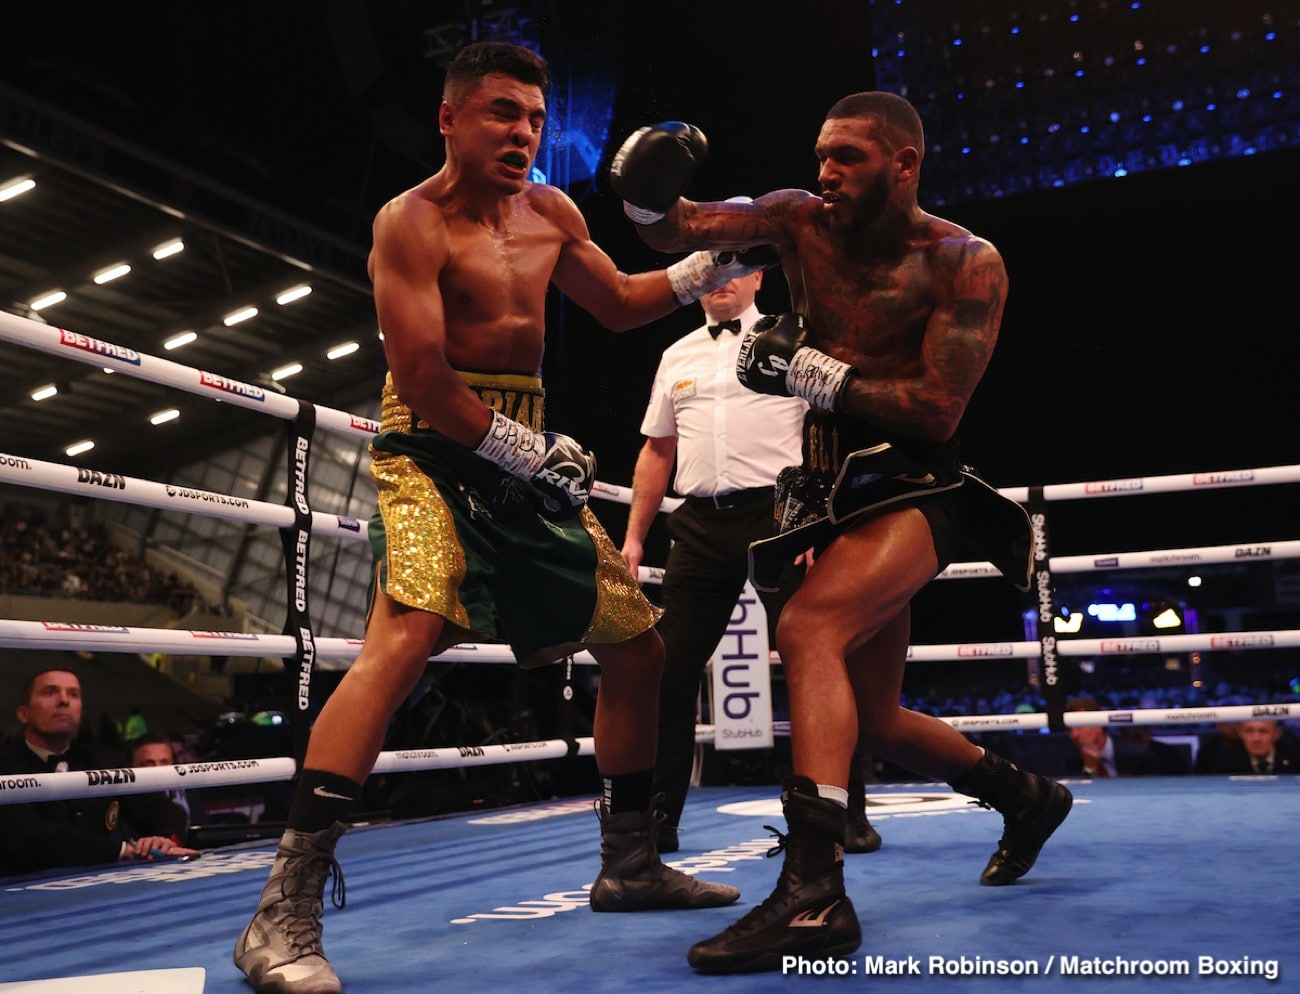 Conor Benn, Adrien Broner boxing photo and news image